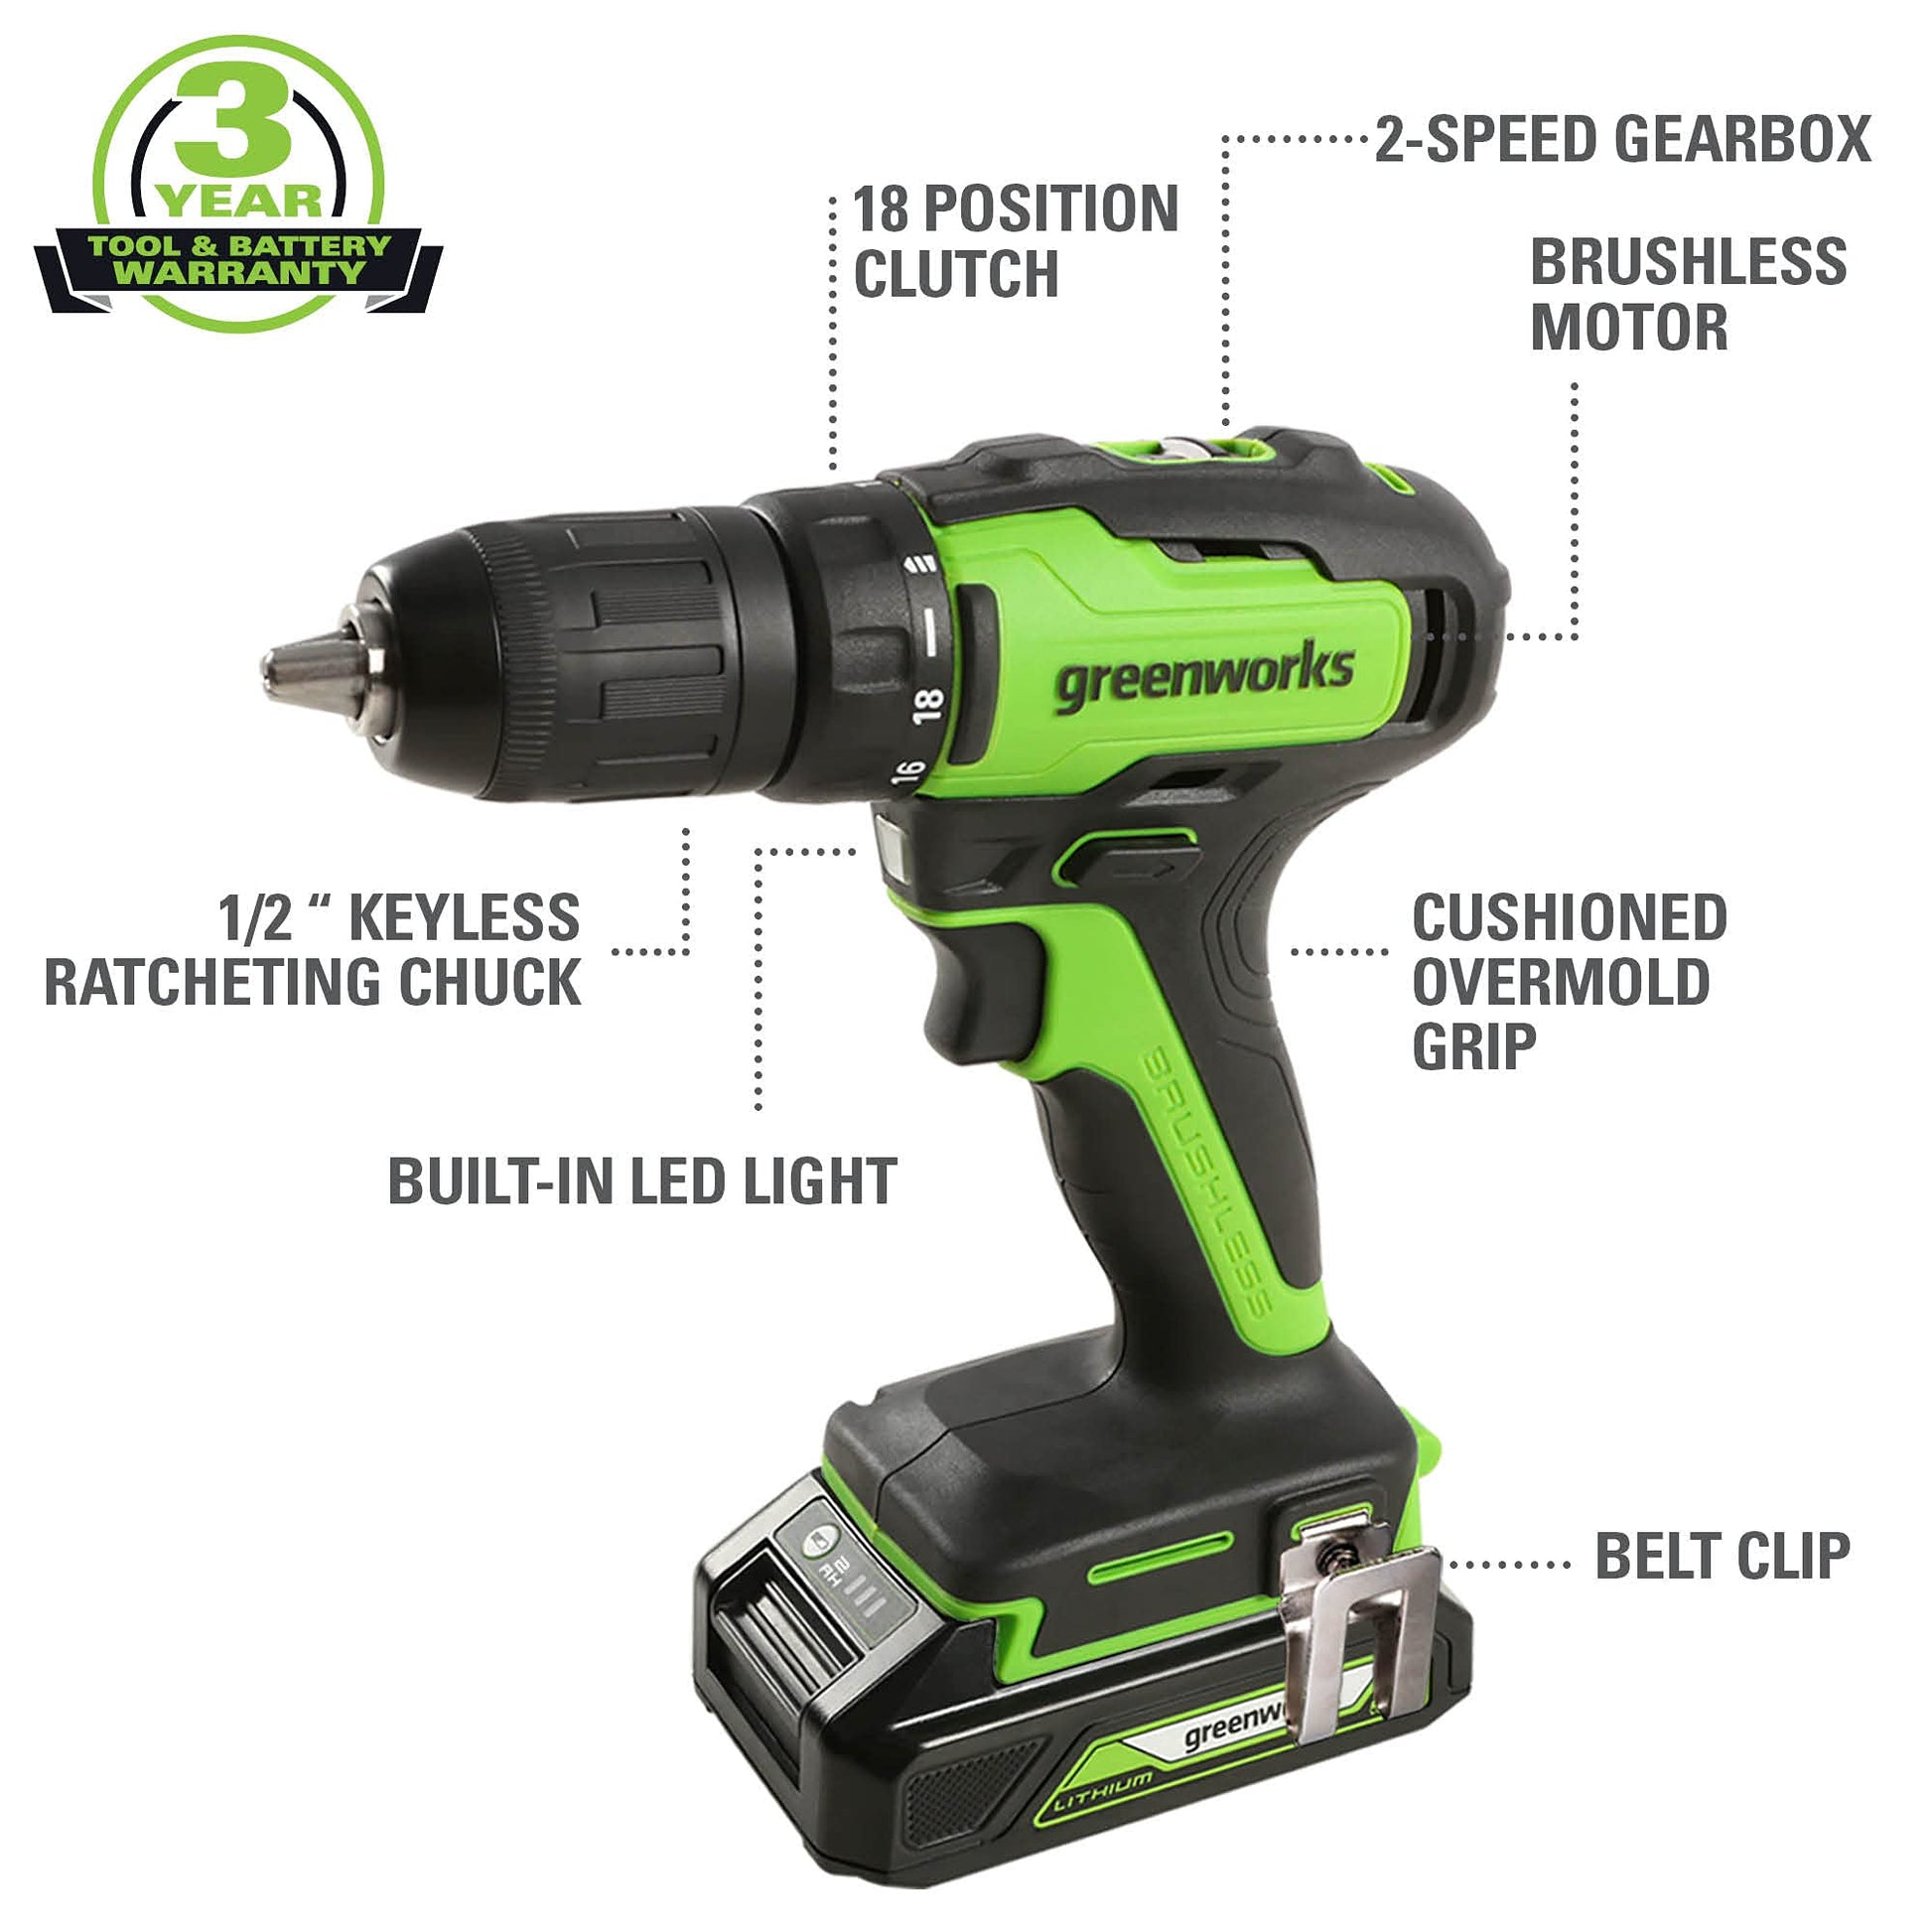 Black & Decker Cordless Drill Drive 18V Lithium Ion with 1.5Ah